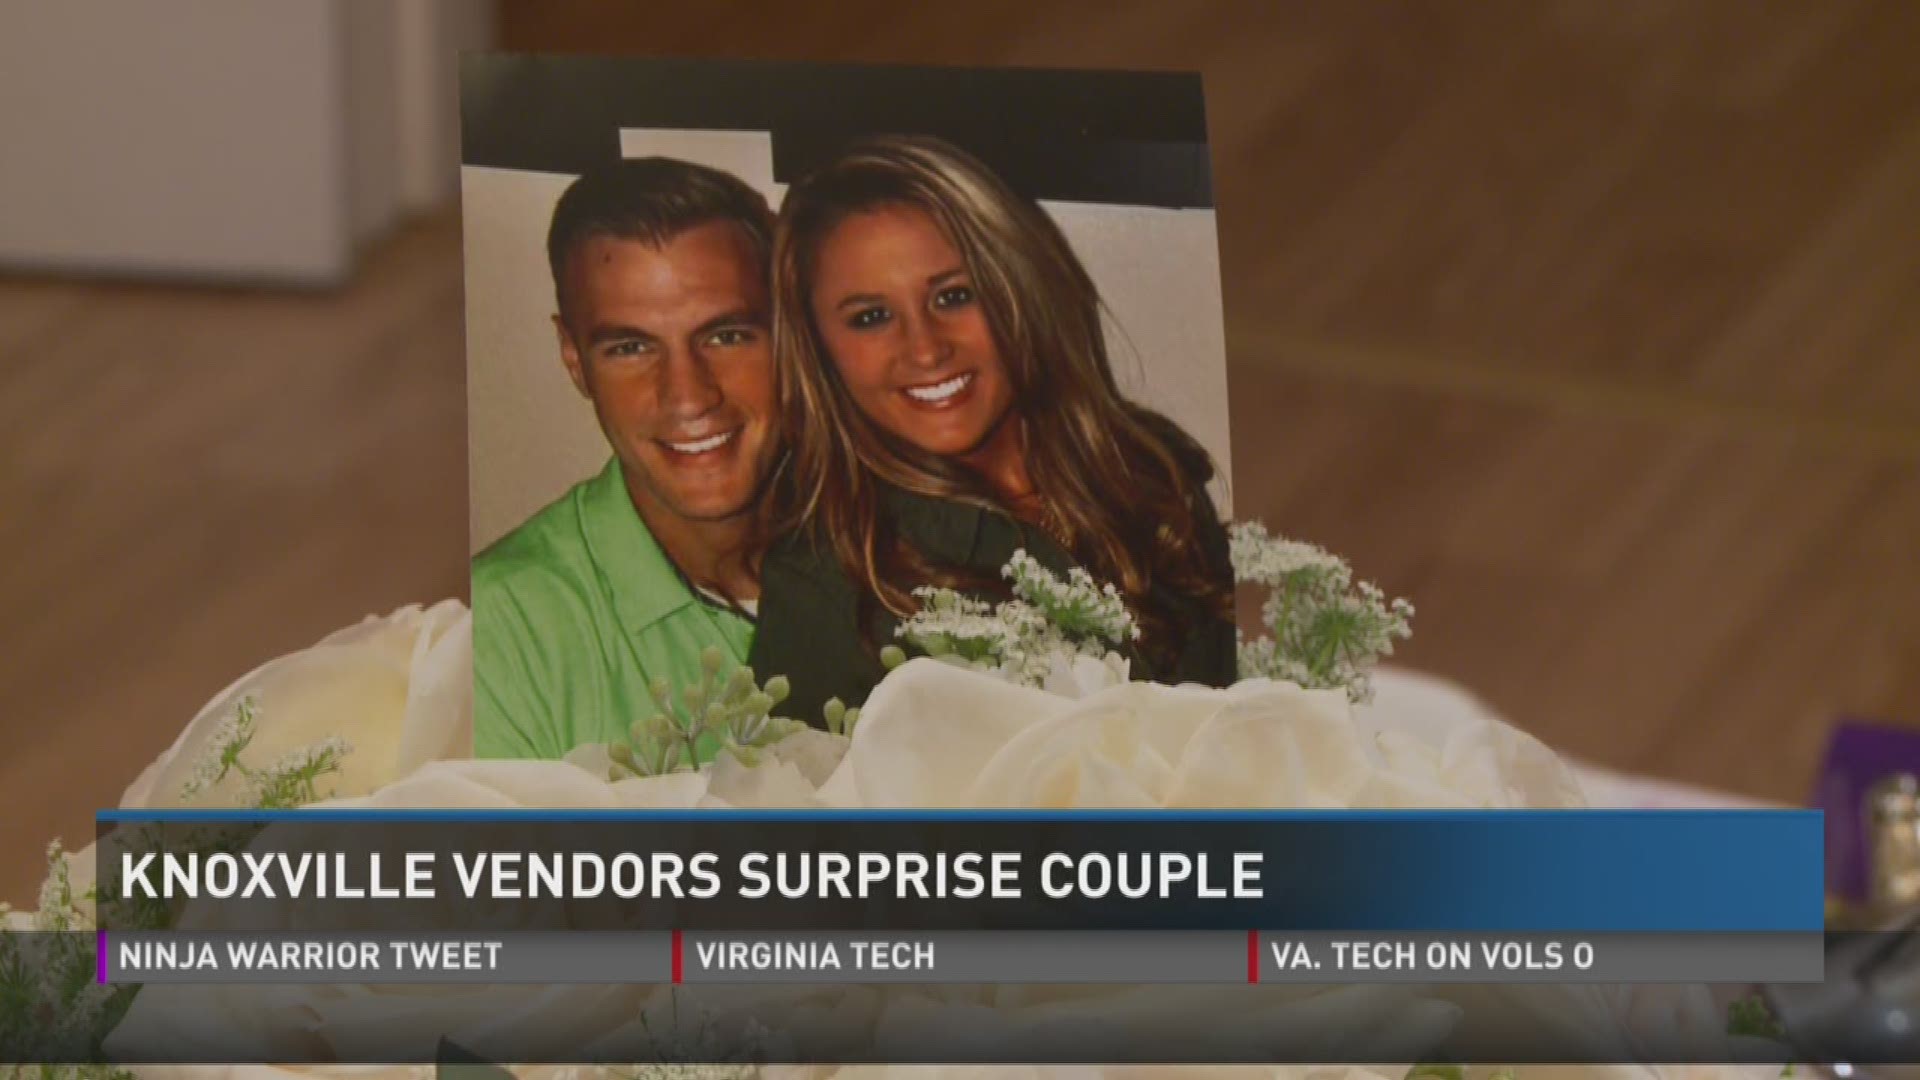 Sept. 6, 2016: A Knoxville bride and groom facing financial difficulties received a surprise gift from some Knoxville wedding vendors.